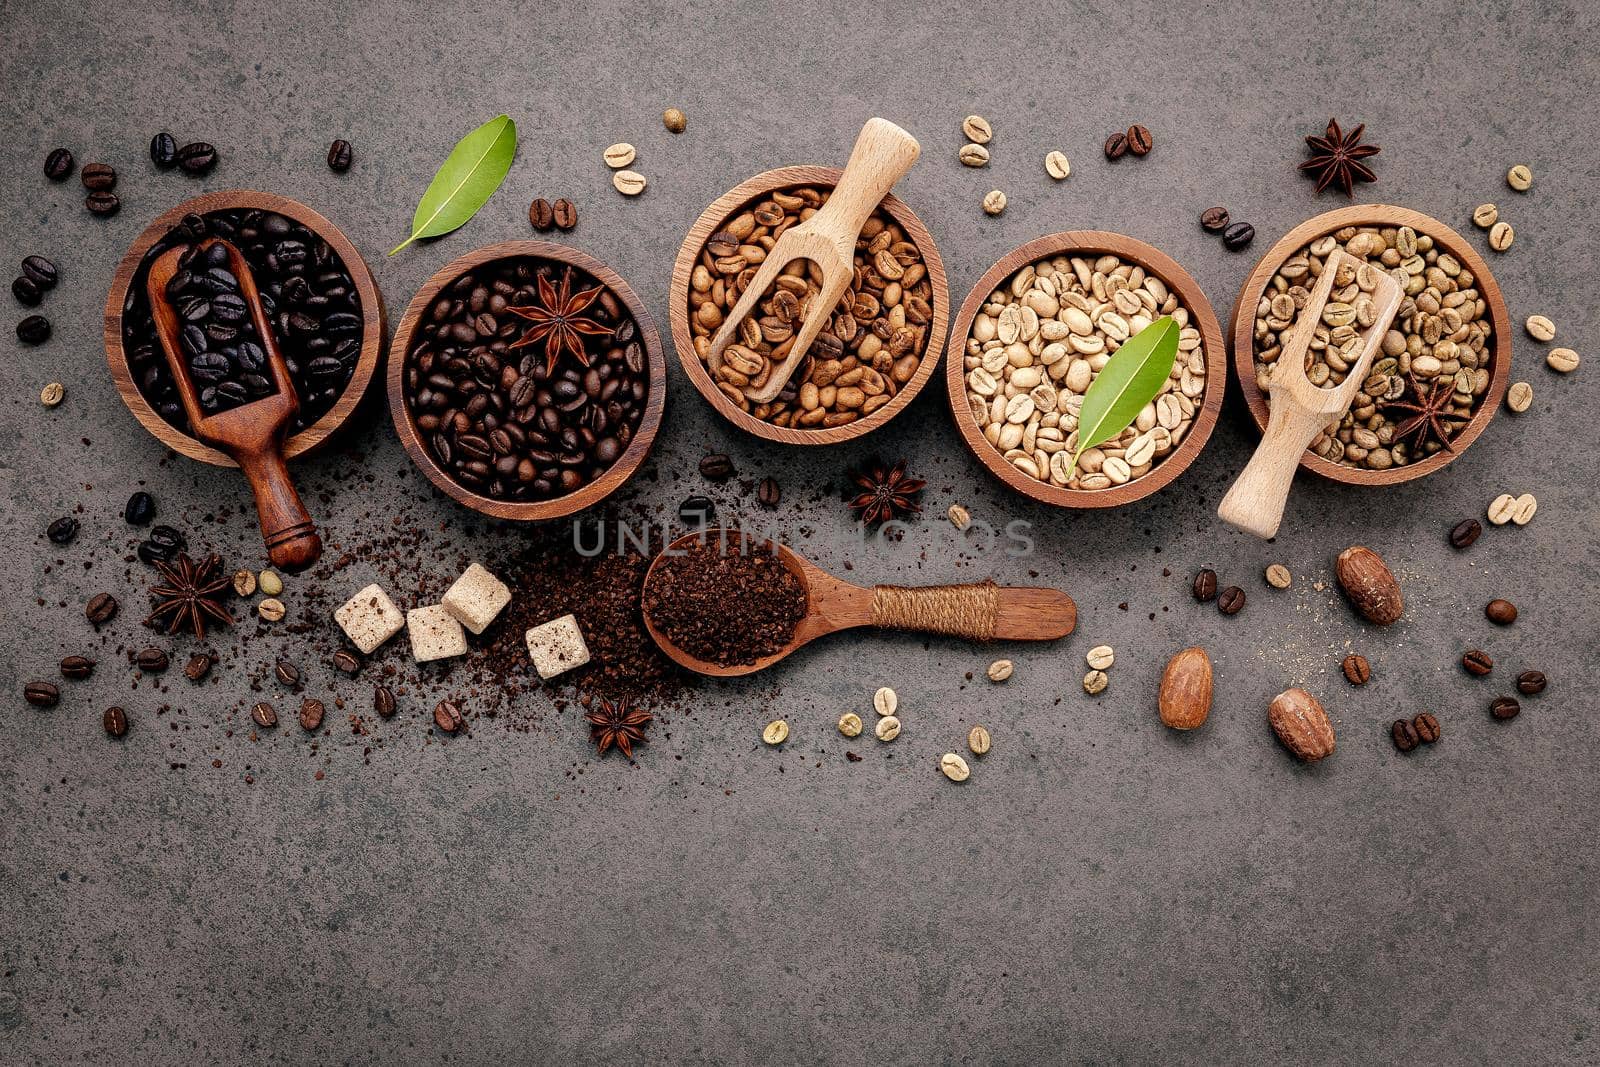 Green and brown unroasted and dark roasted coffee beans in wooden bowl with spoons set up on dark concrete background.